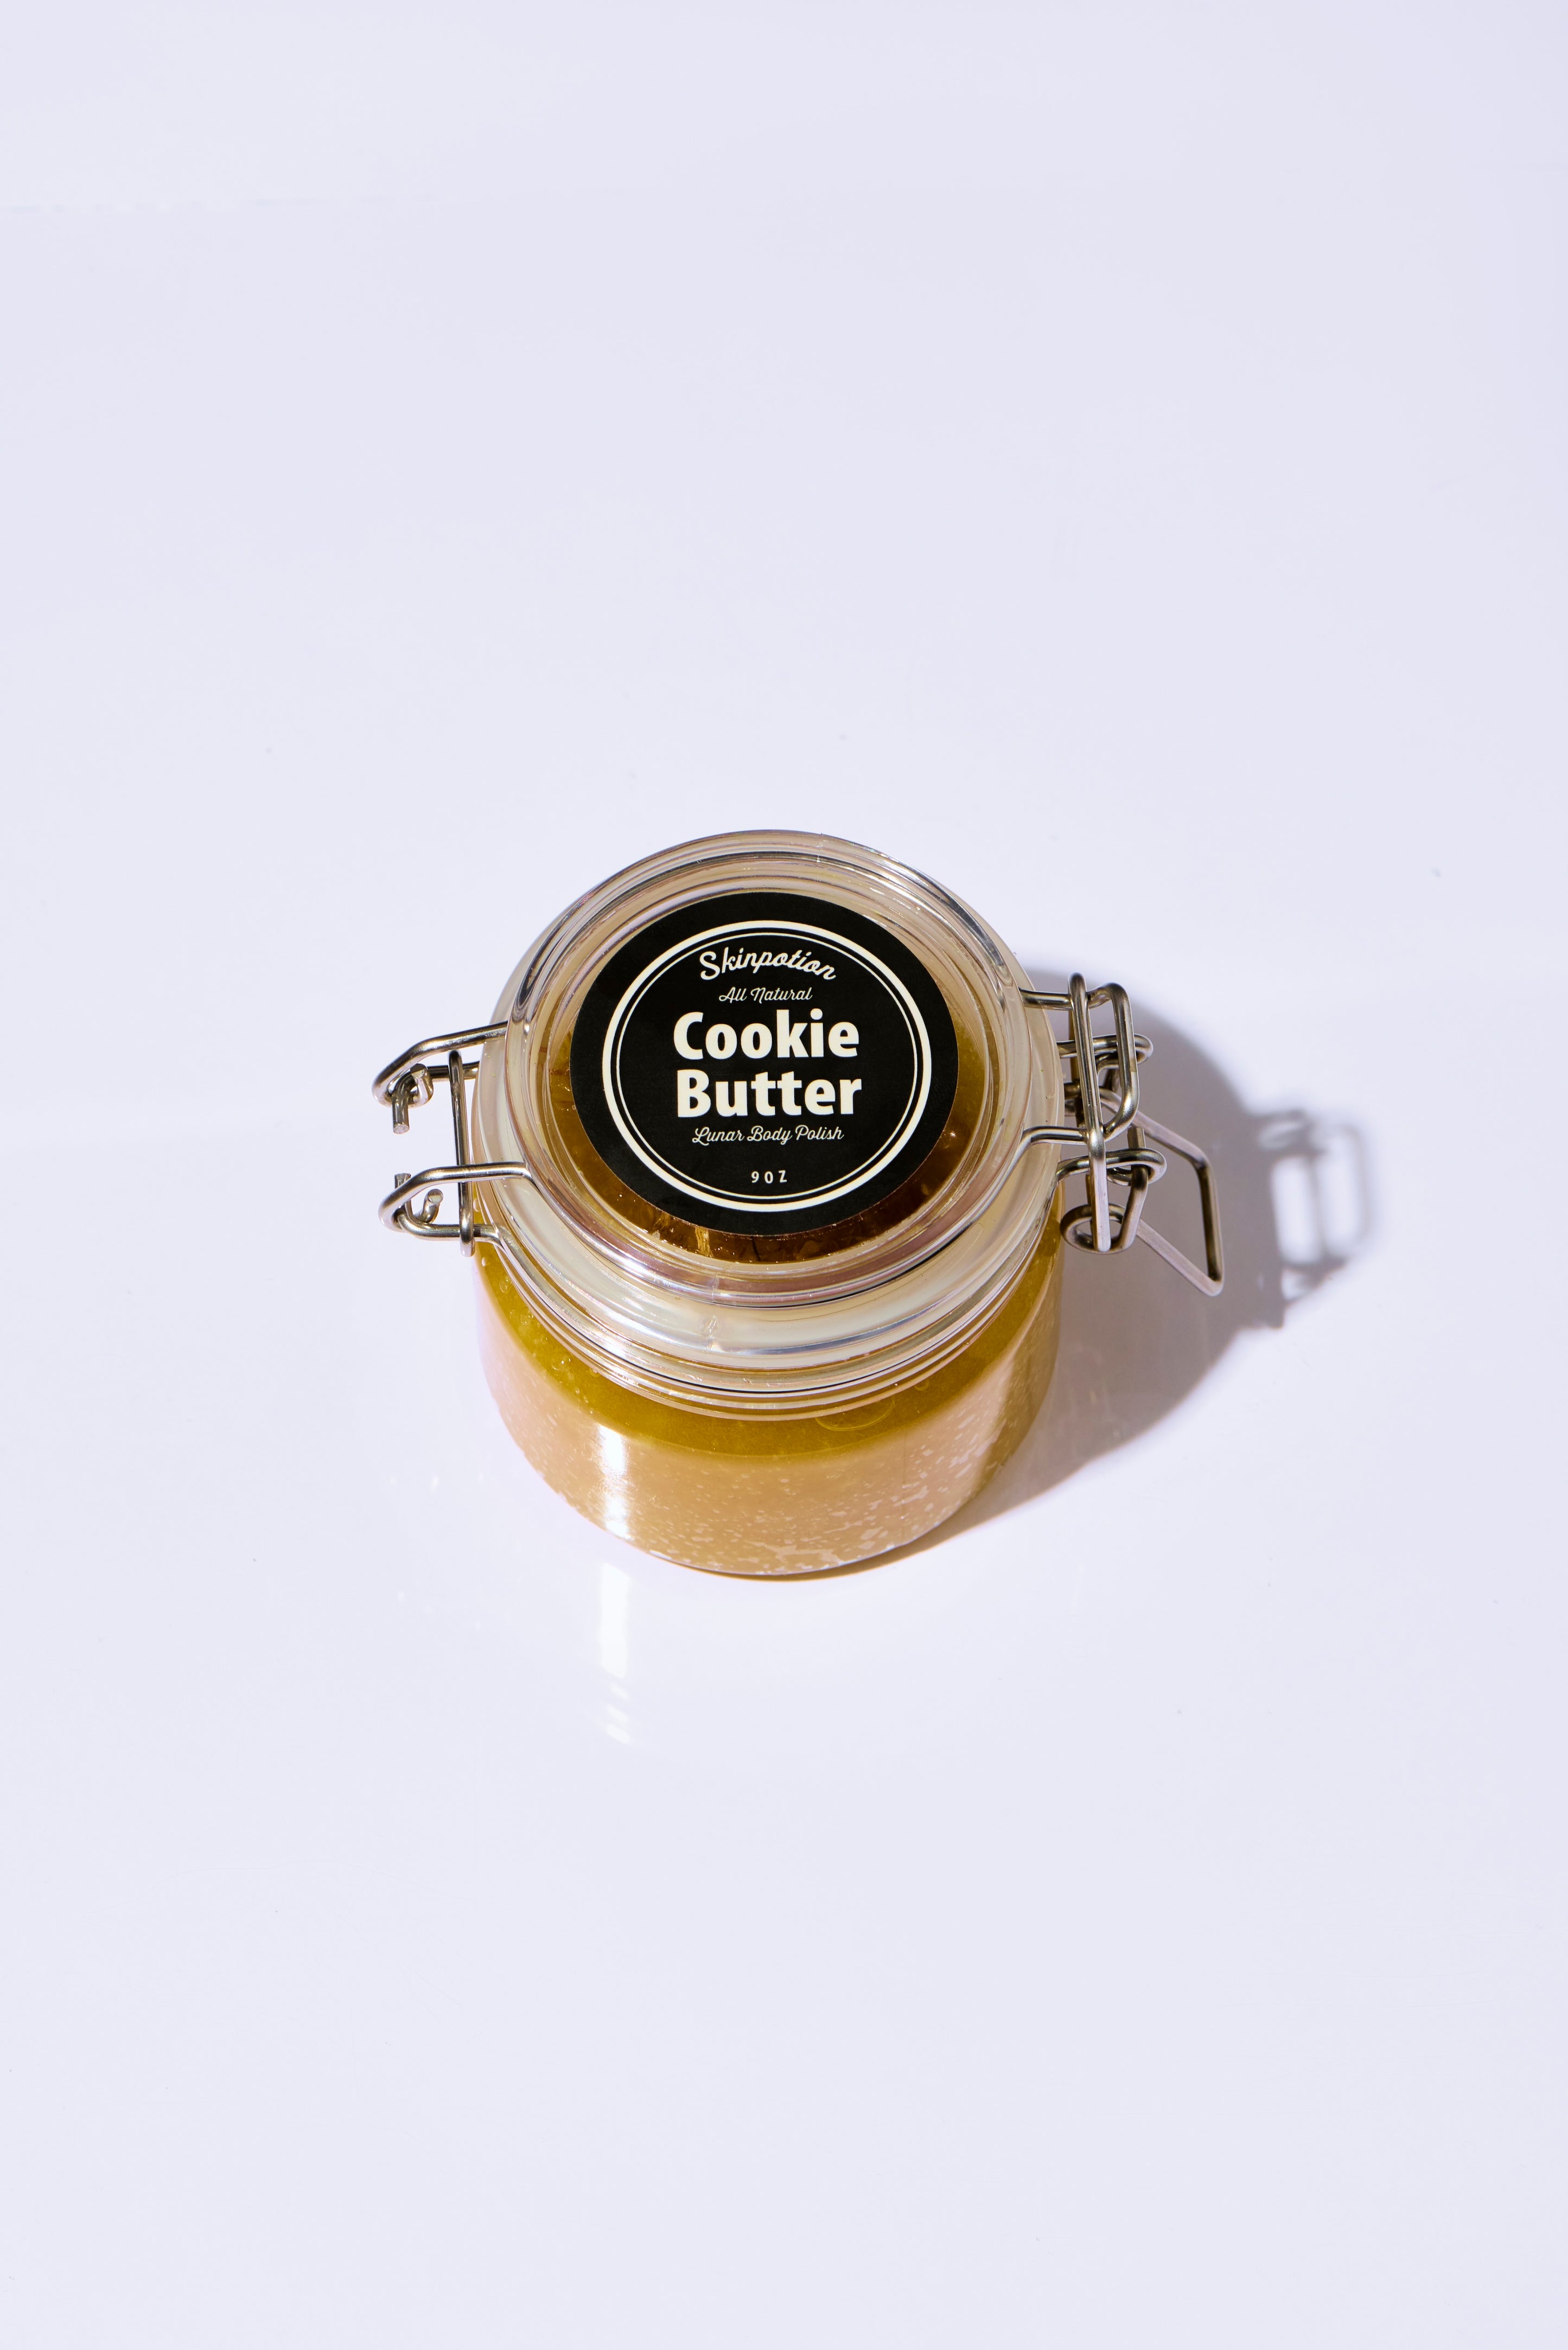 Cookie Butter Skin Ritual Skinpotion